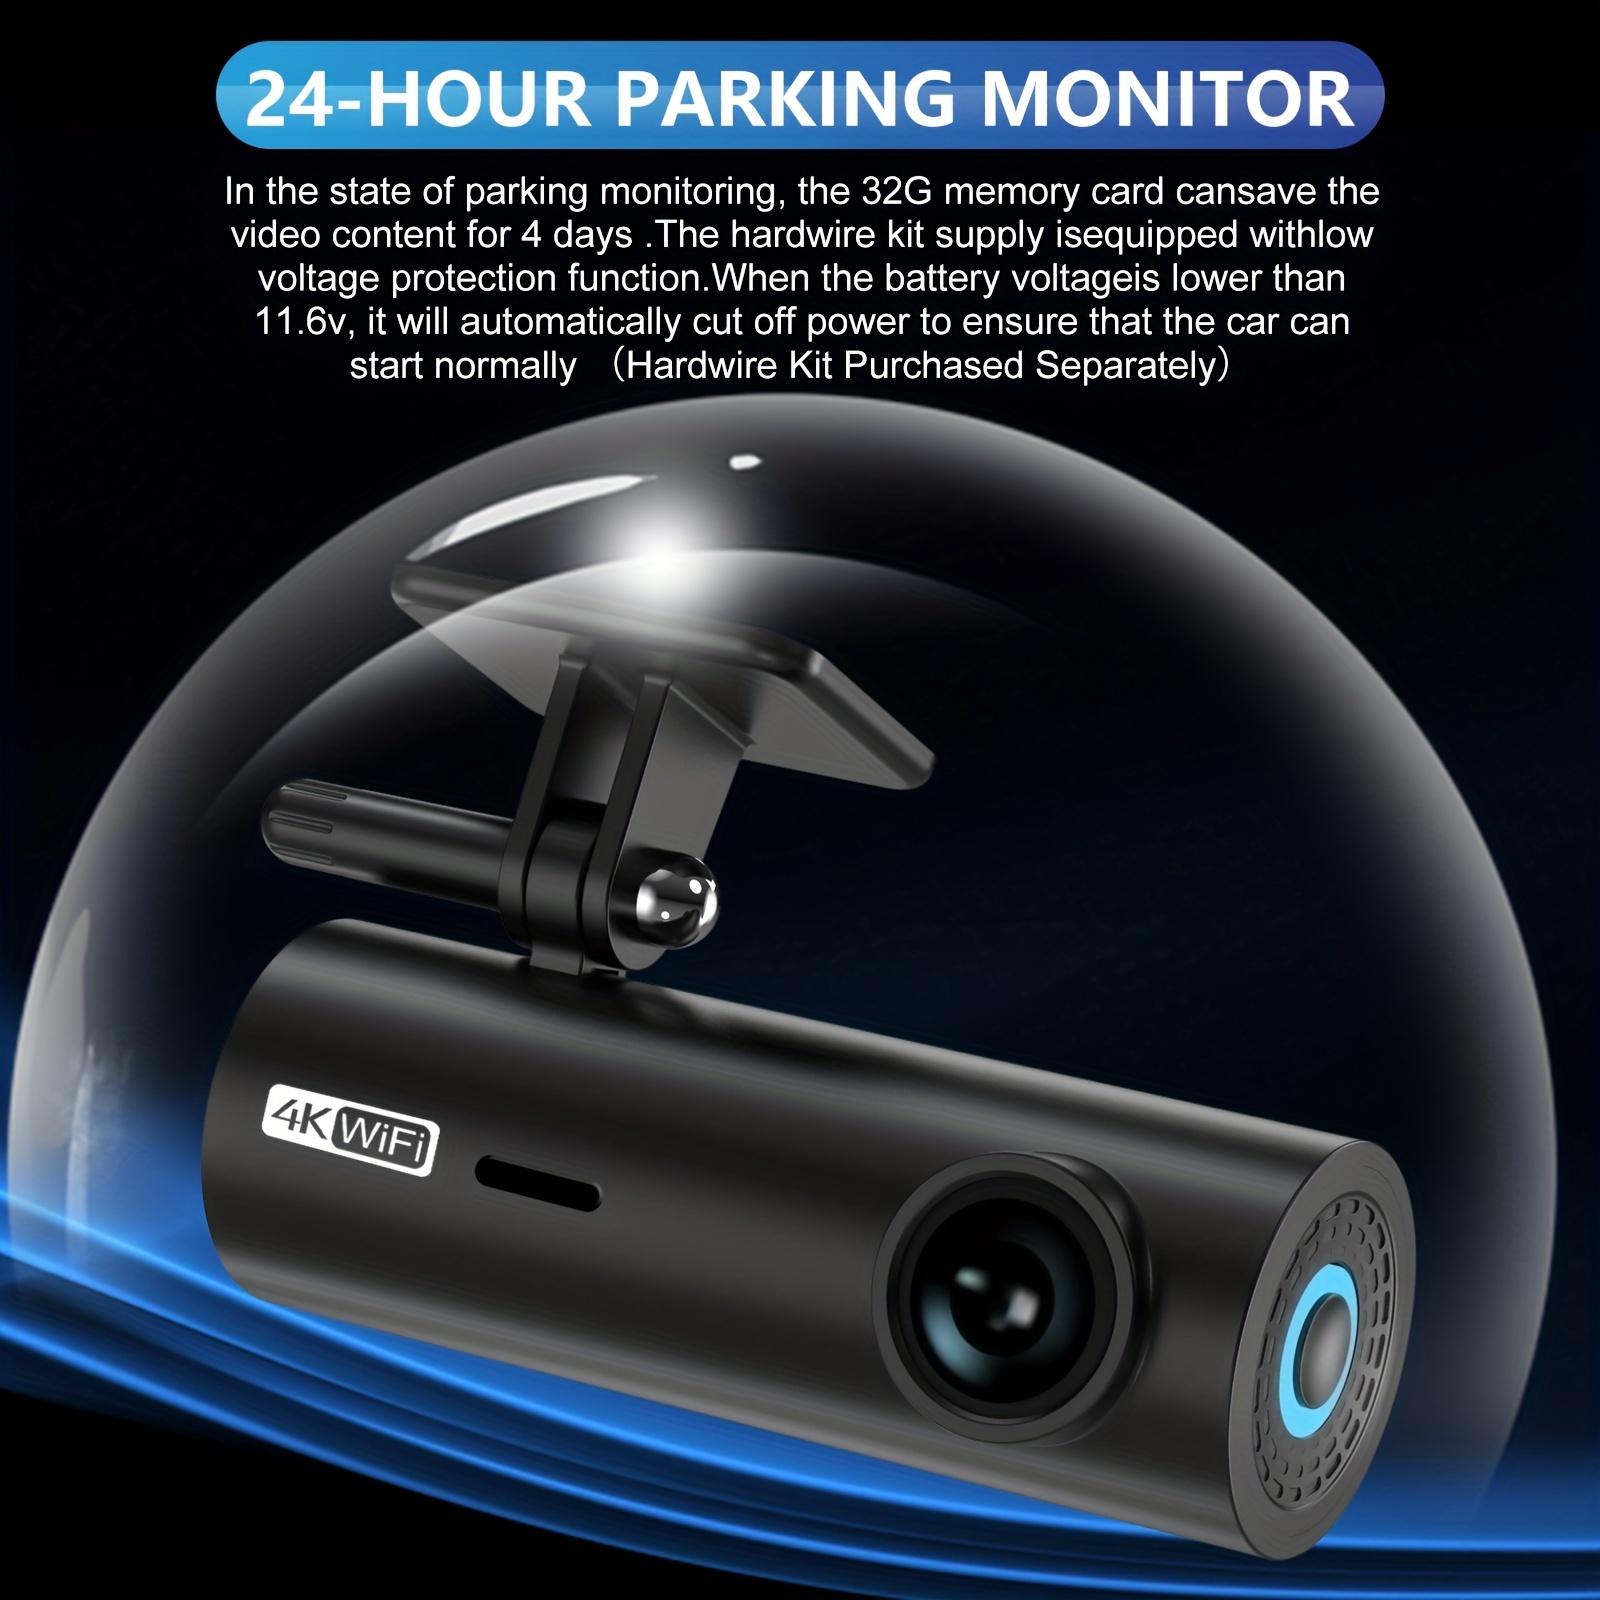 Dash Cam Front and Rear 4K+1080P WiFi Dash Camera for Cars with App, 24  Hours Parking Mode, G-Sensor, Loop Recording, Support 256GB Max